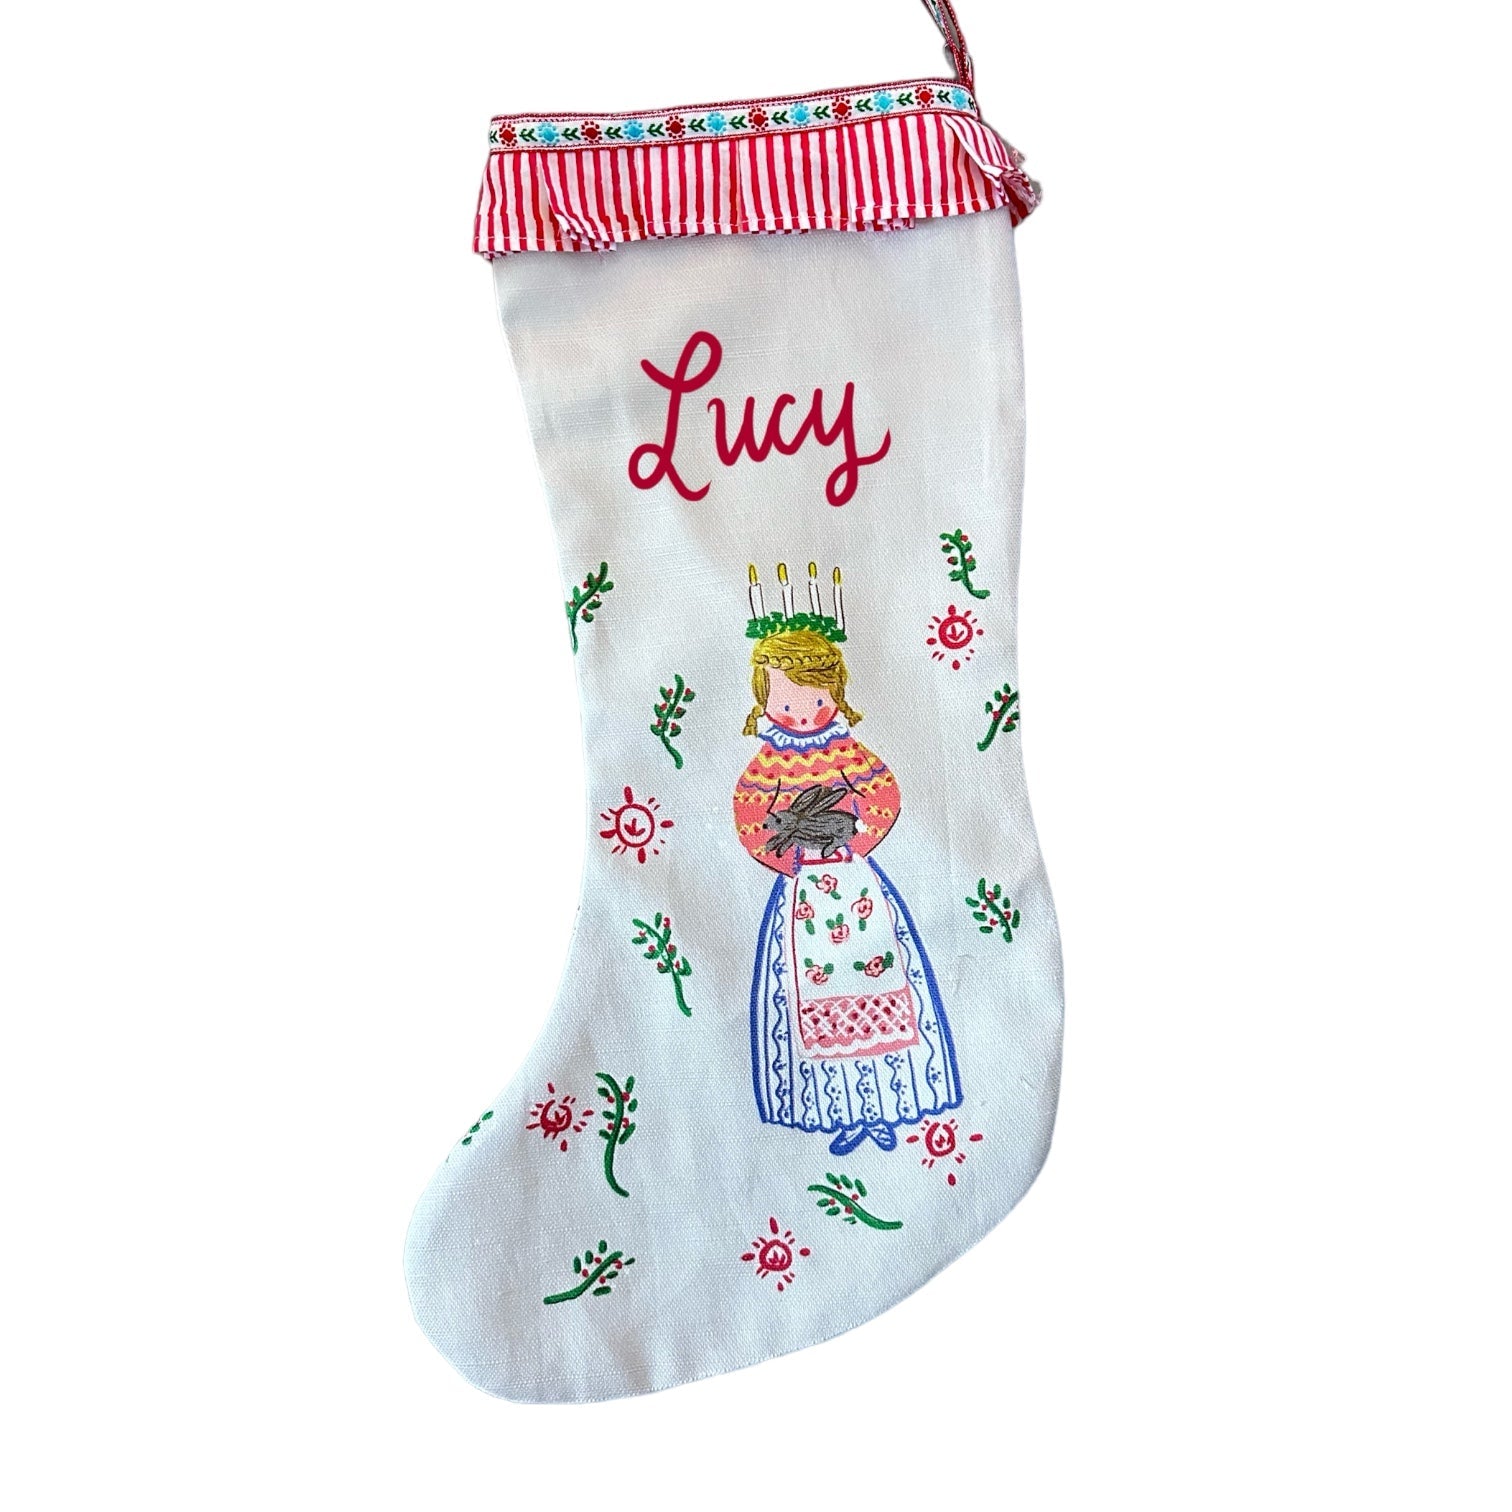 Stocking - St. Lucia with Bunny - Premium  from Tricia Lowenfield Design 